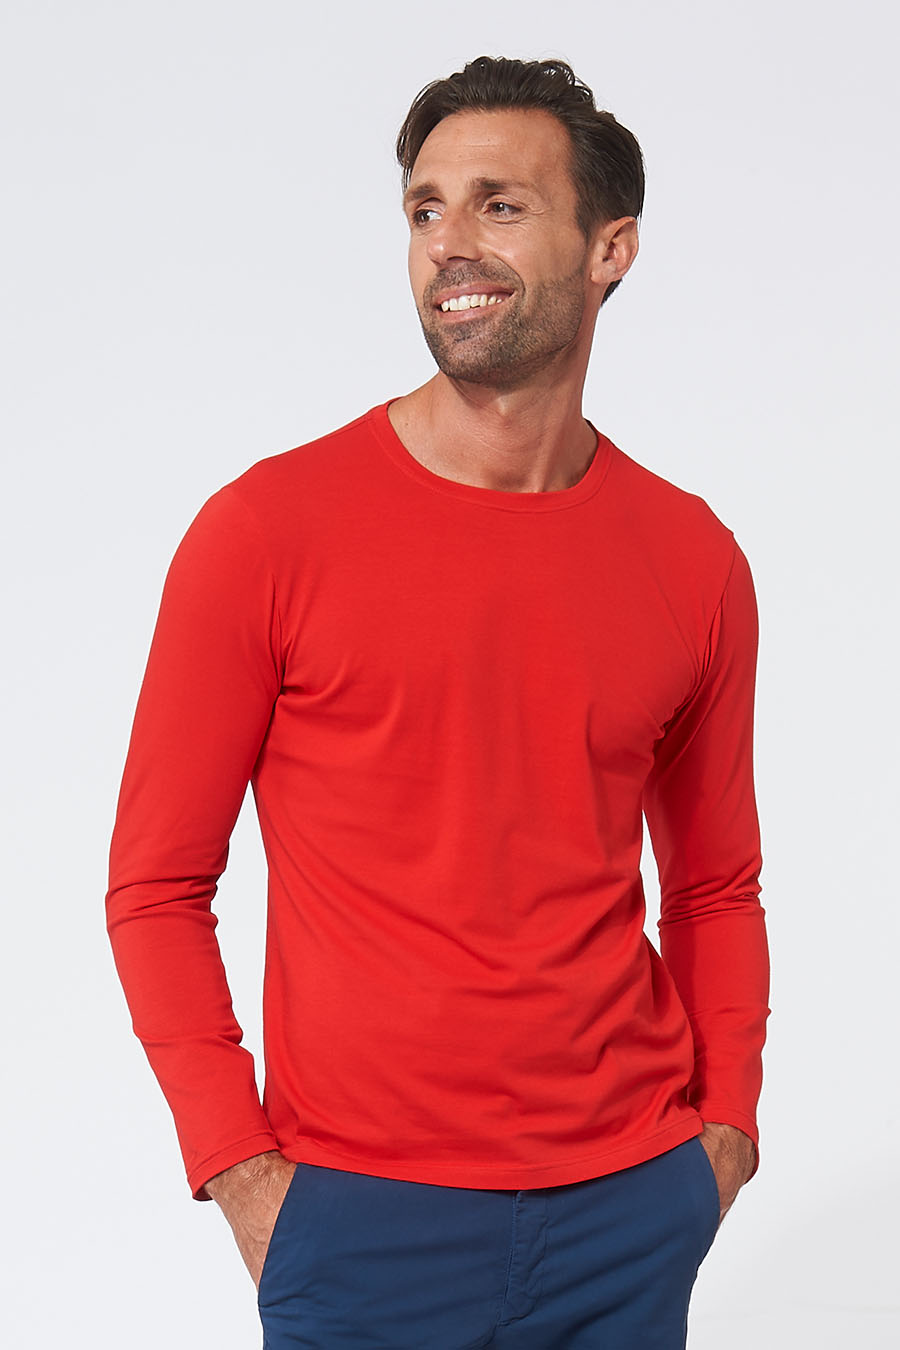 Tee-shirt Homme made in France à manches longues rouge - Fil Rouge